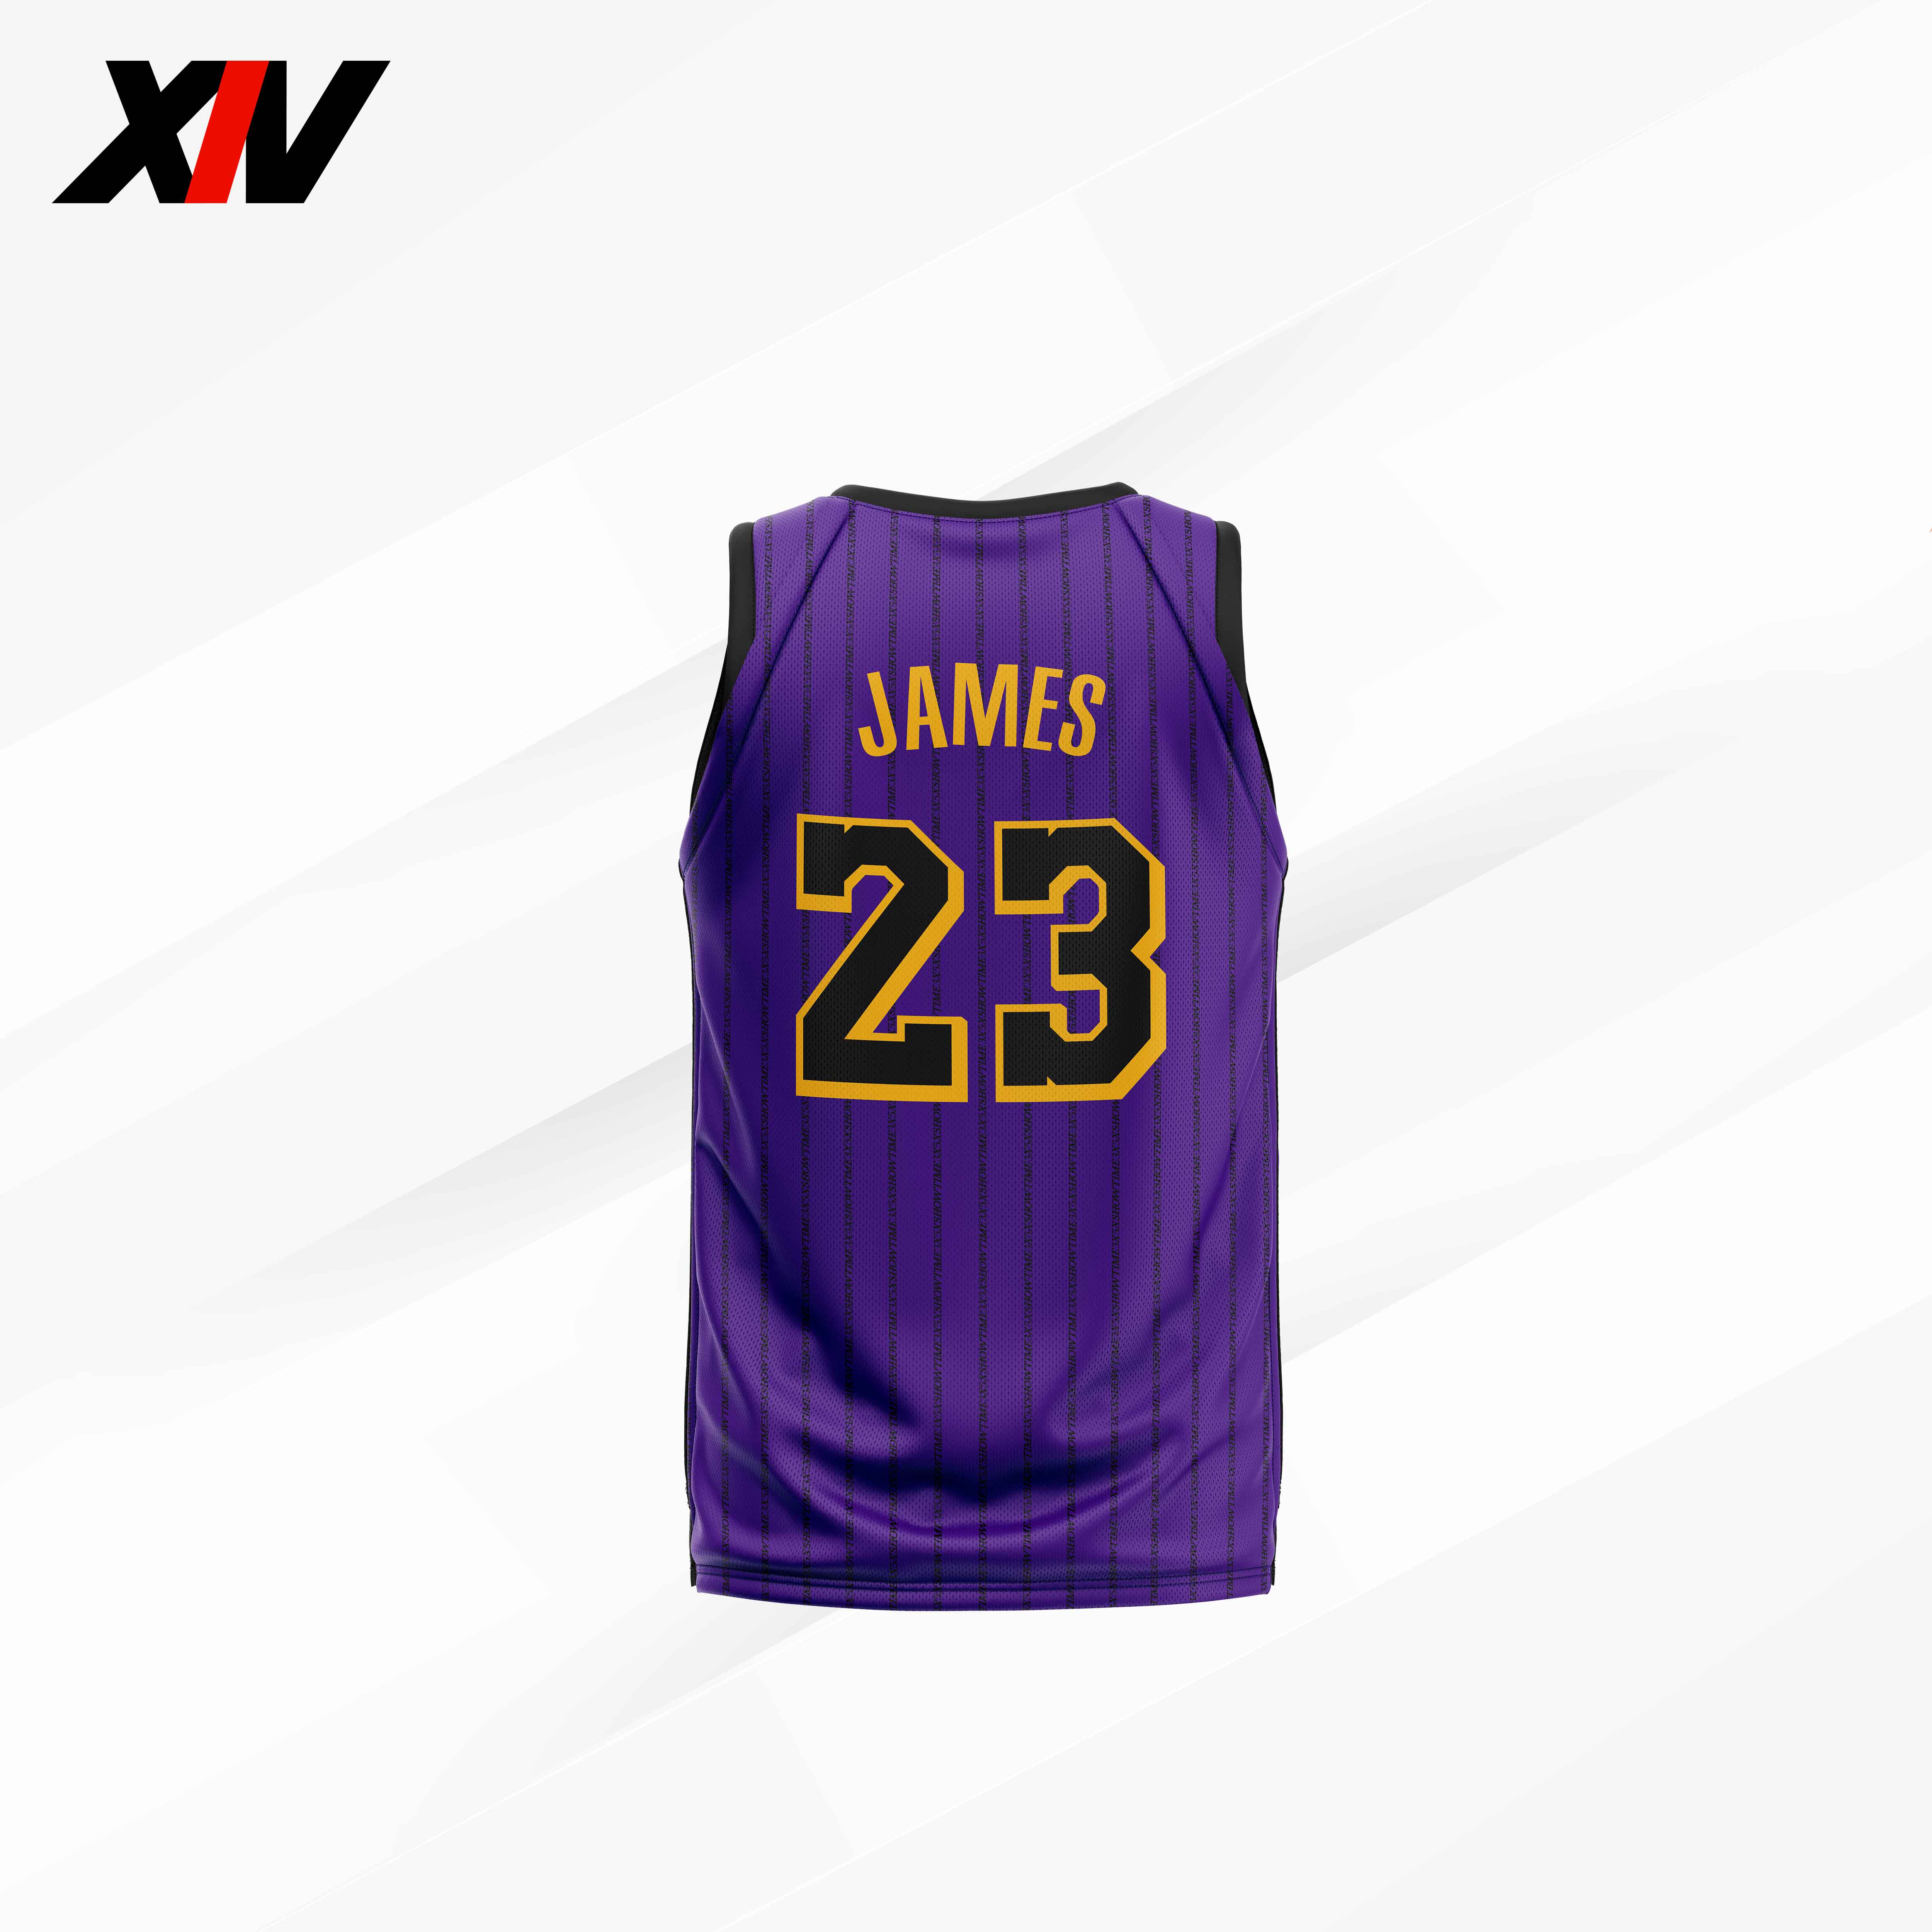 lakers violet jersey 2018